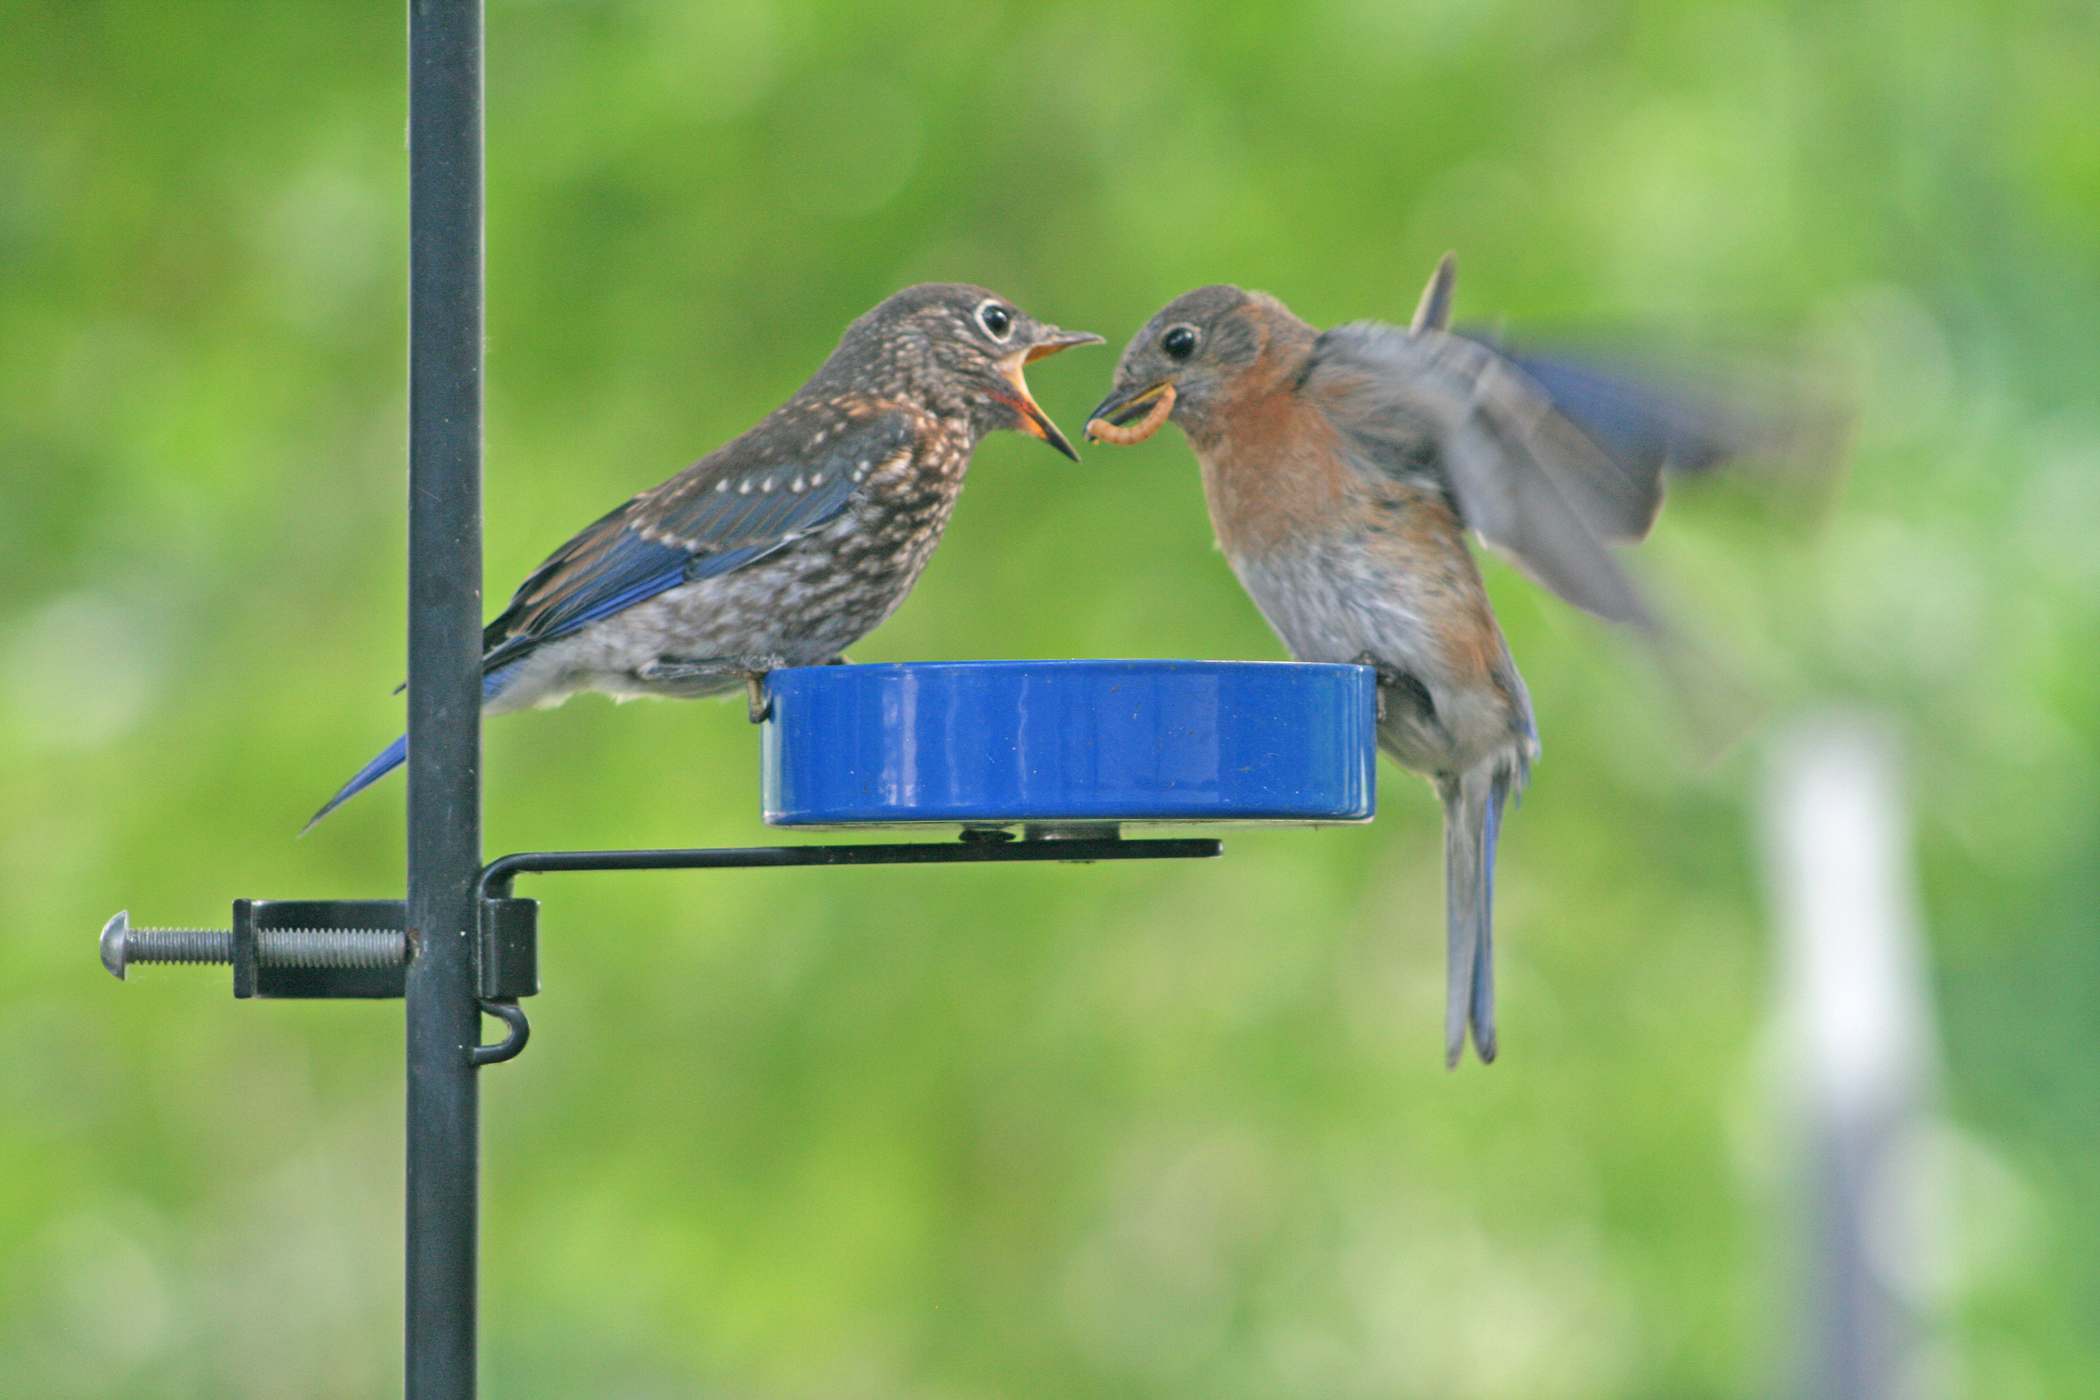 Eastern Bluebird young and adult at feeder